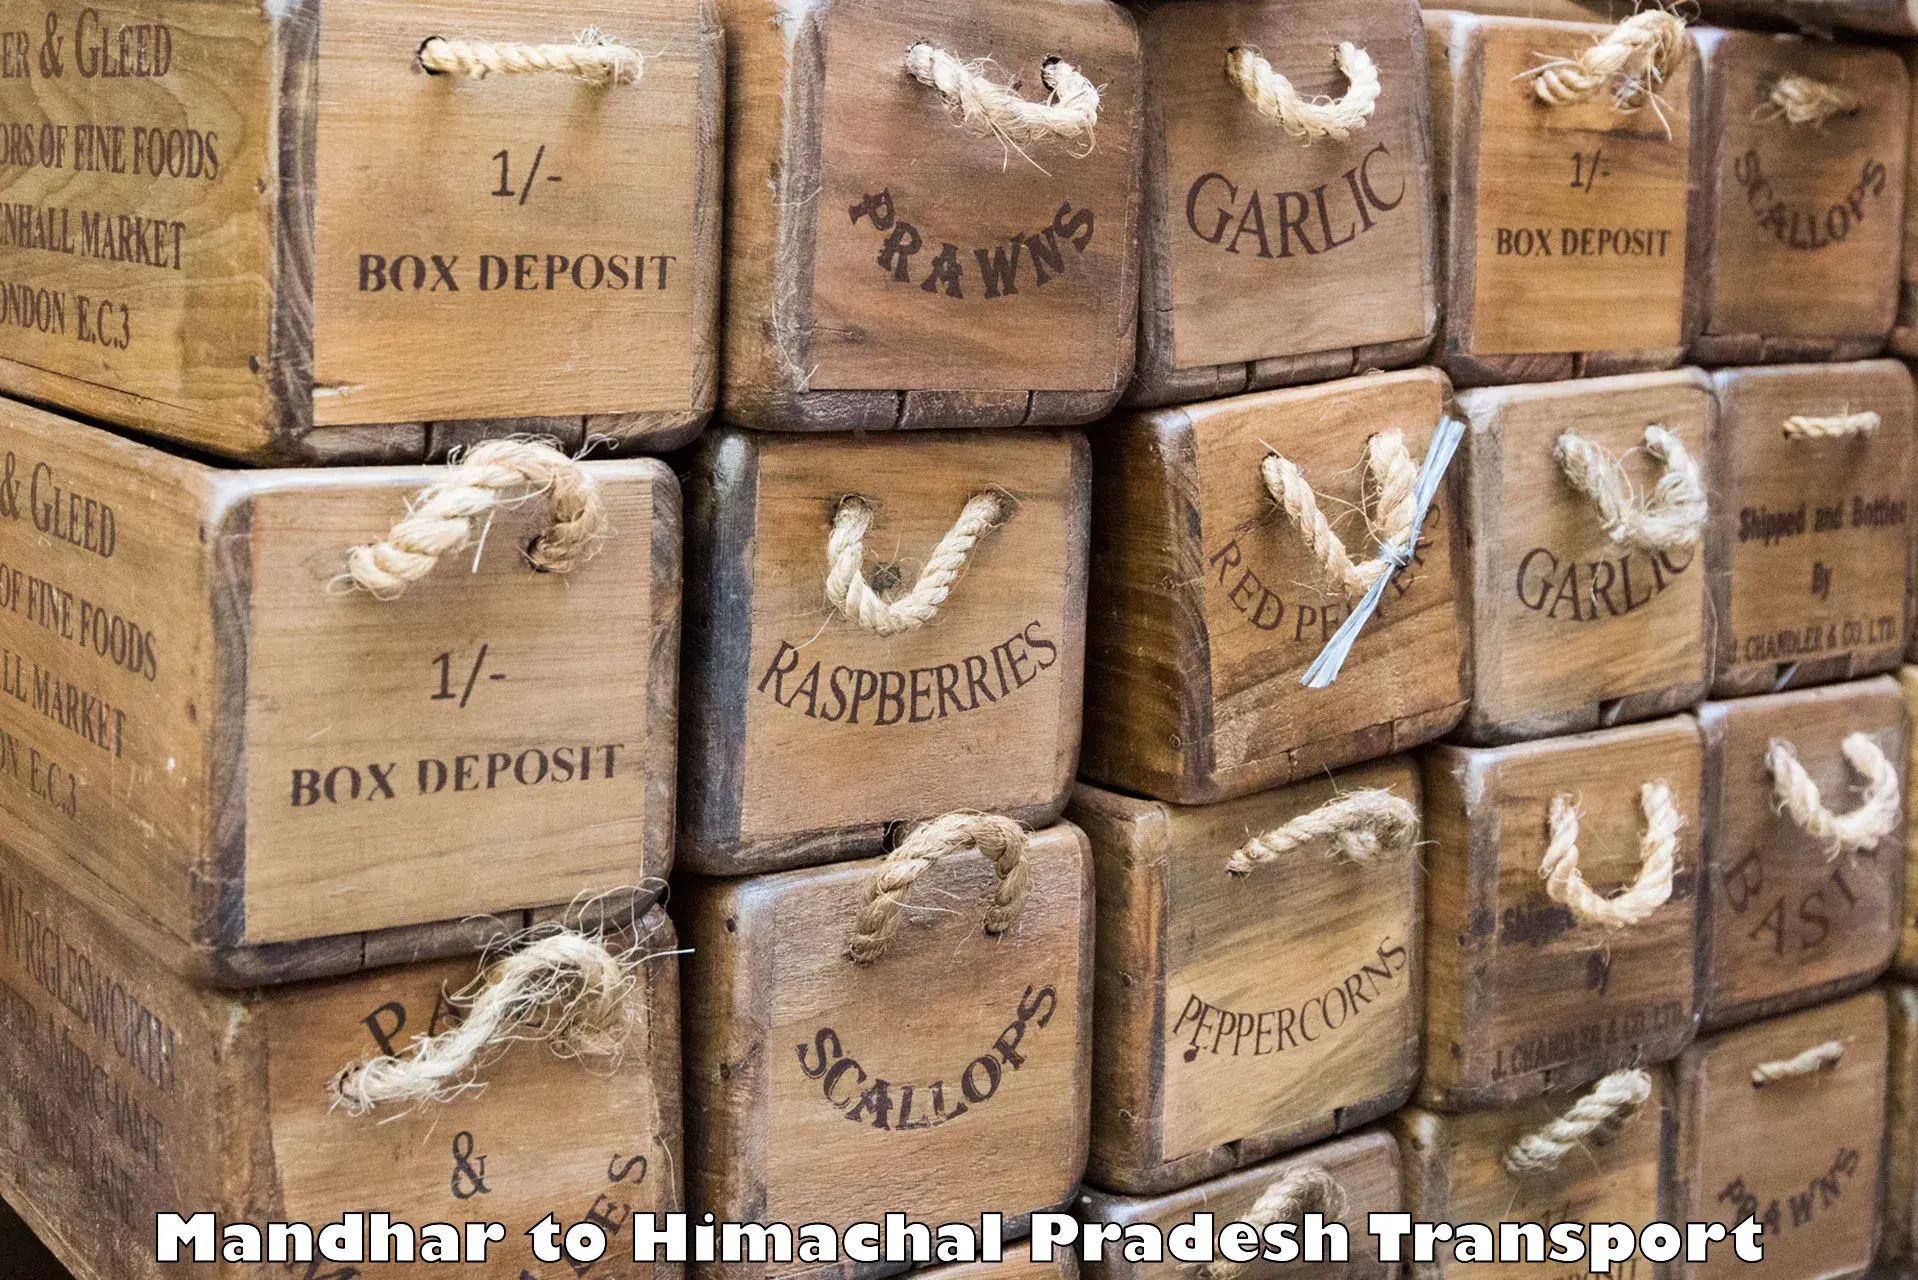 Air freight transport services Mandhar to Kunihar